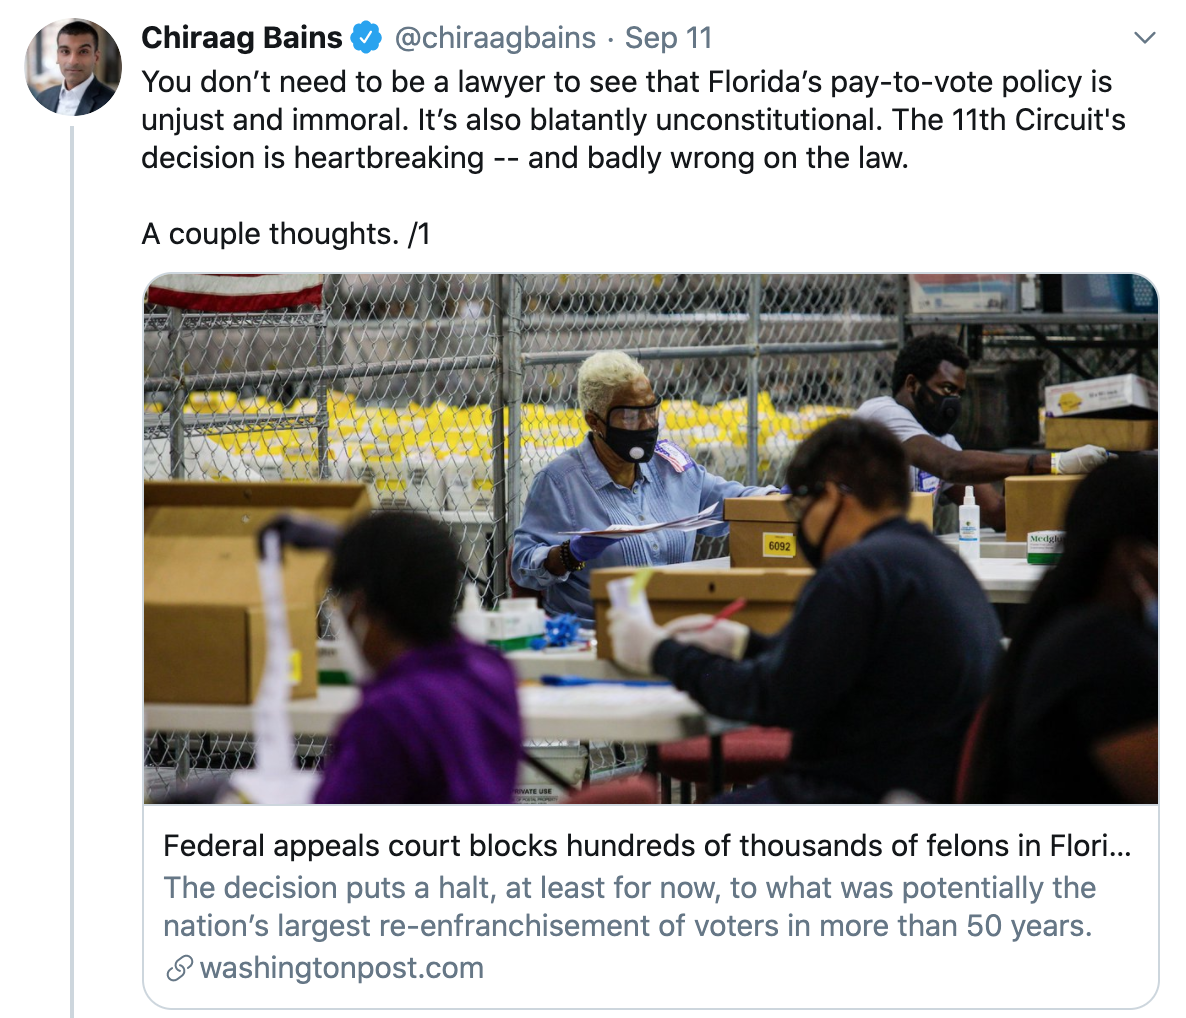 "You don''t need to be a lawyer to see that Florida''s pay-to-vote policy is unjust and immoral." - Chiraag Bains